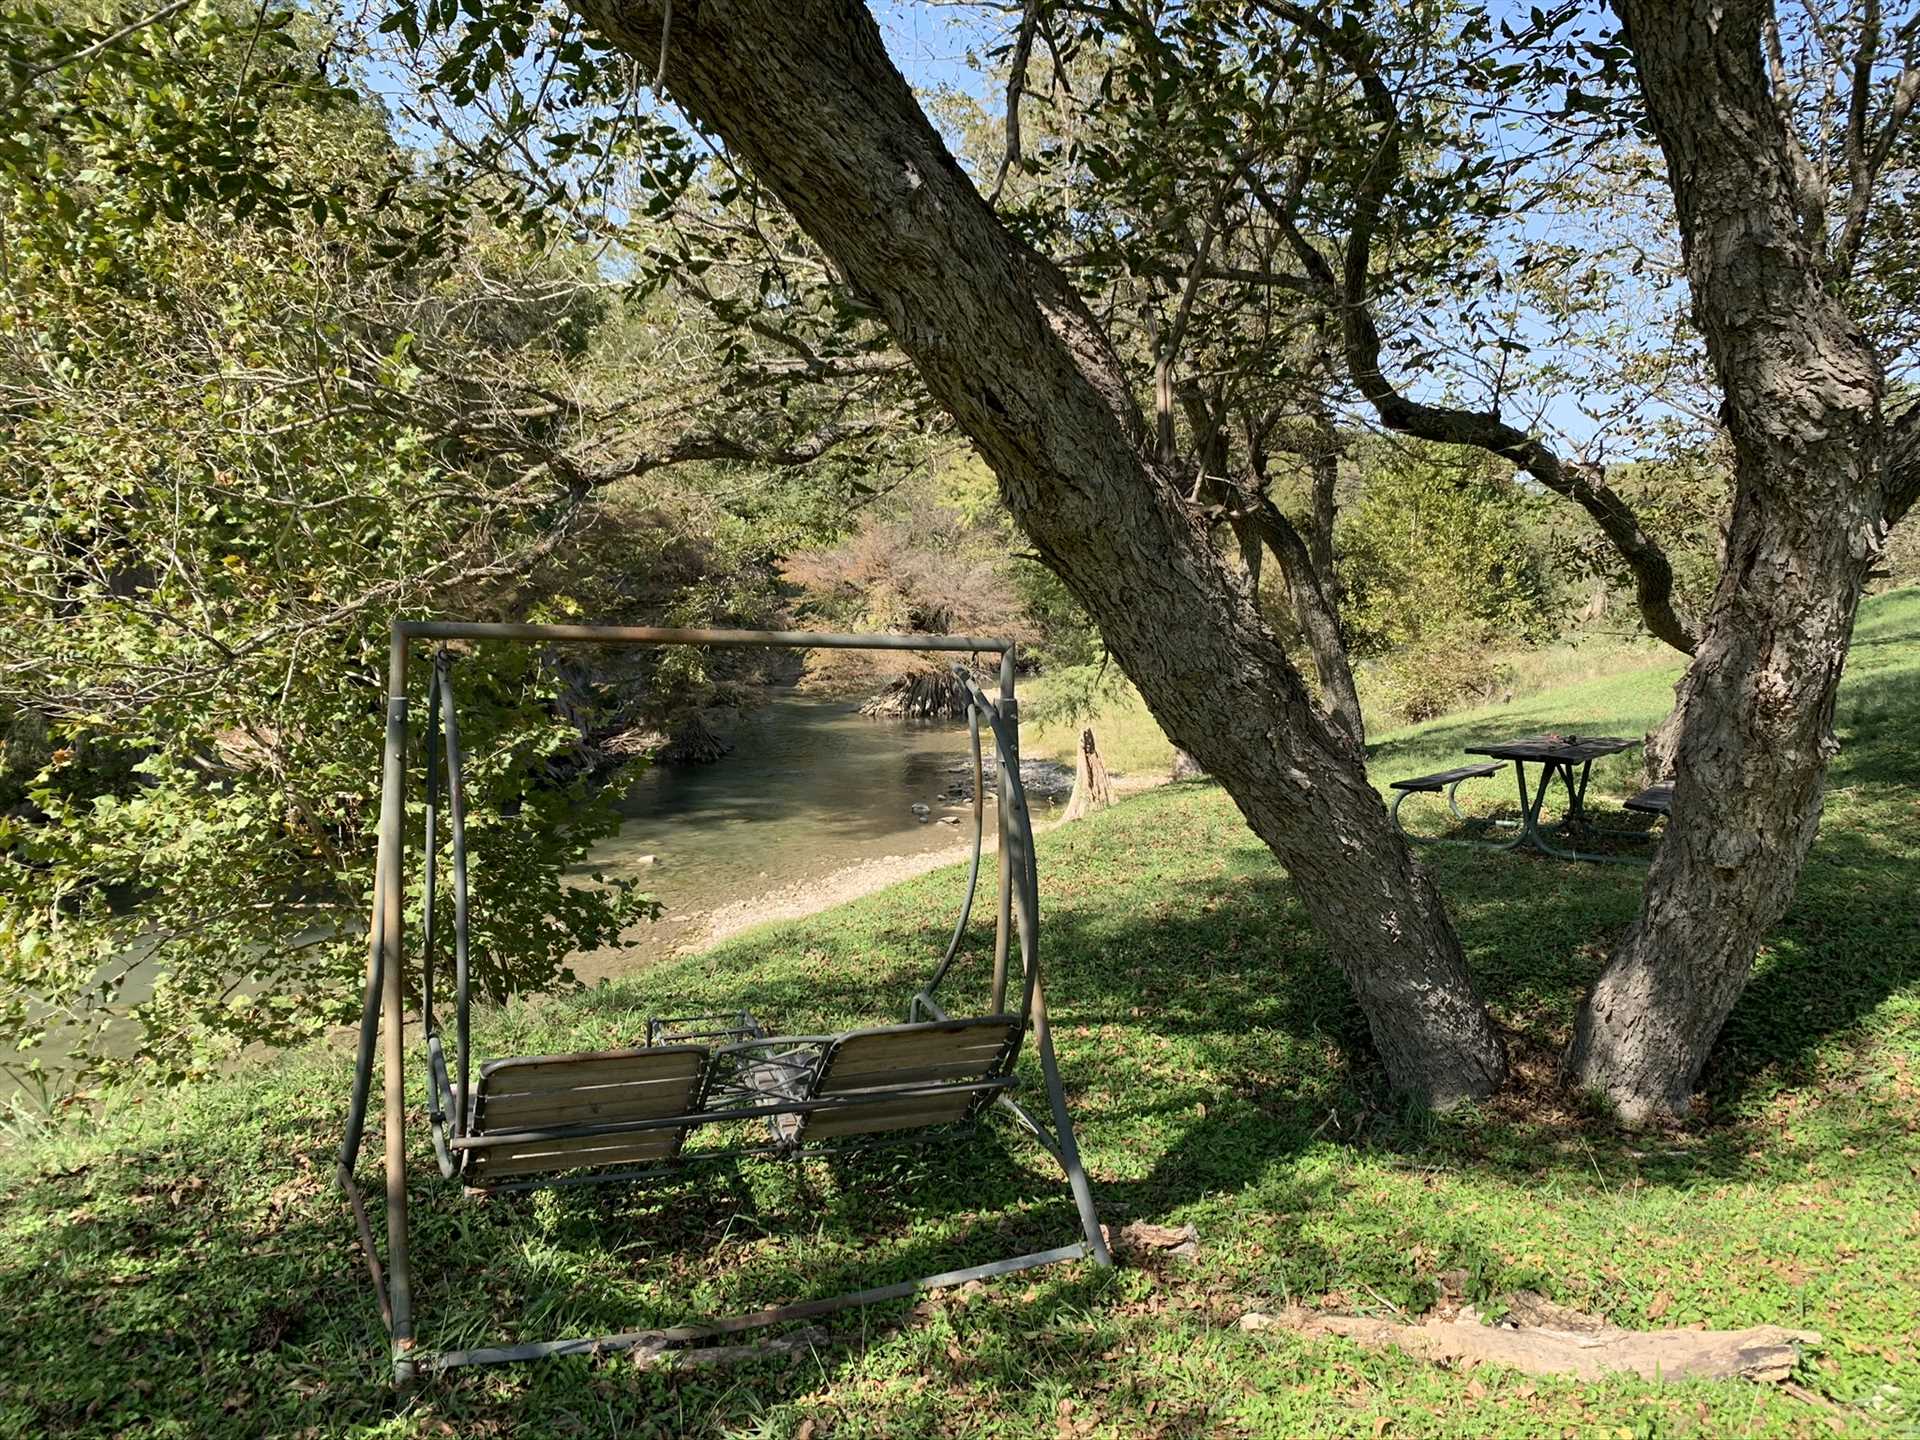                                                 Swing in the shade with that special someone! It's a great place to sip a glass of Texas wine alongside the peaceful river.